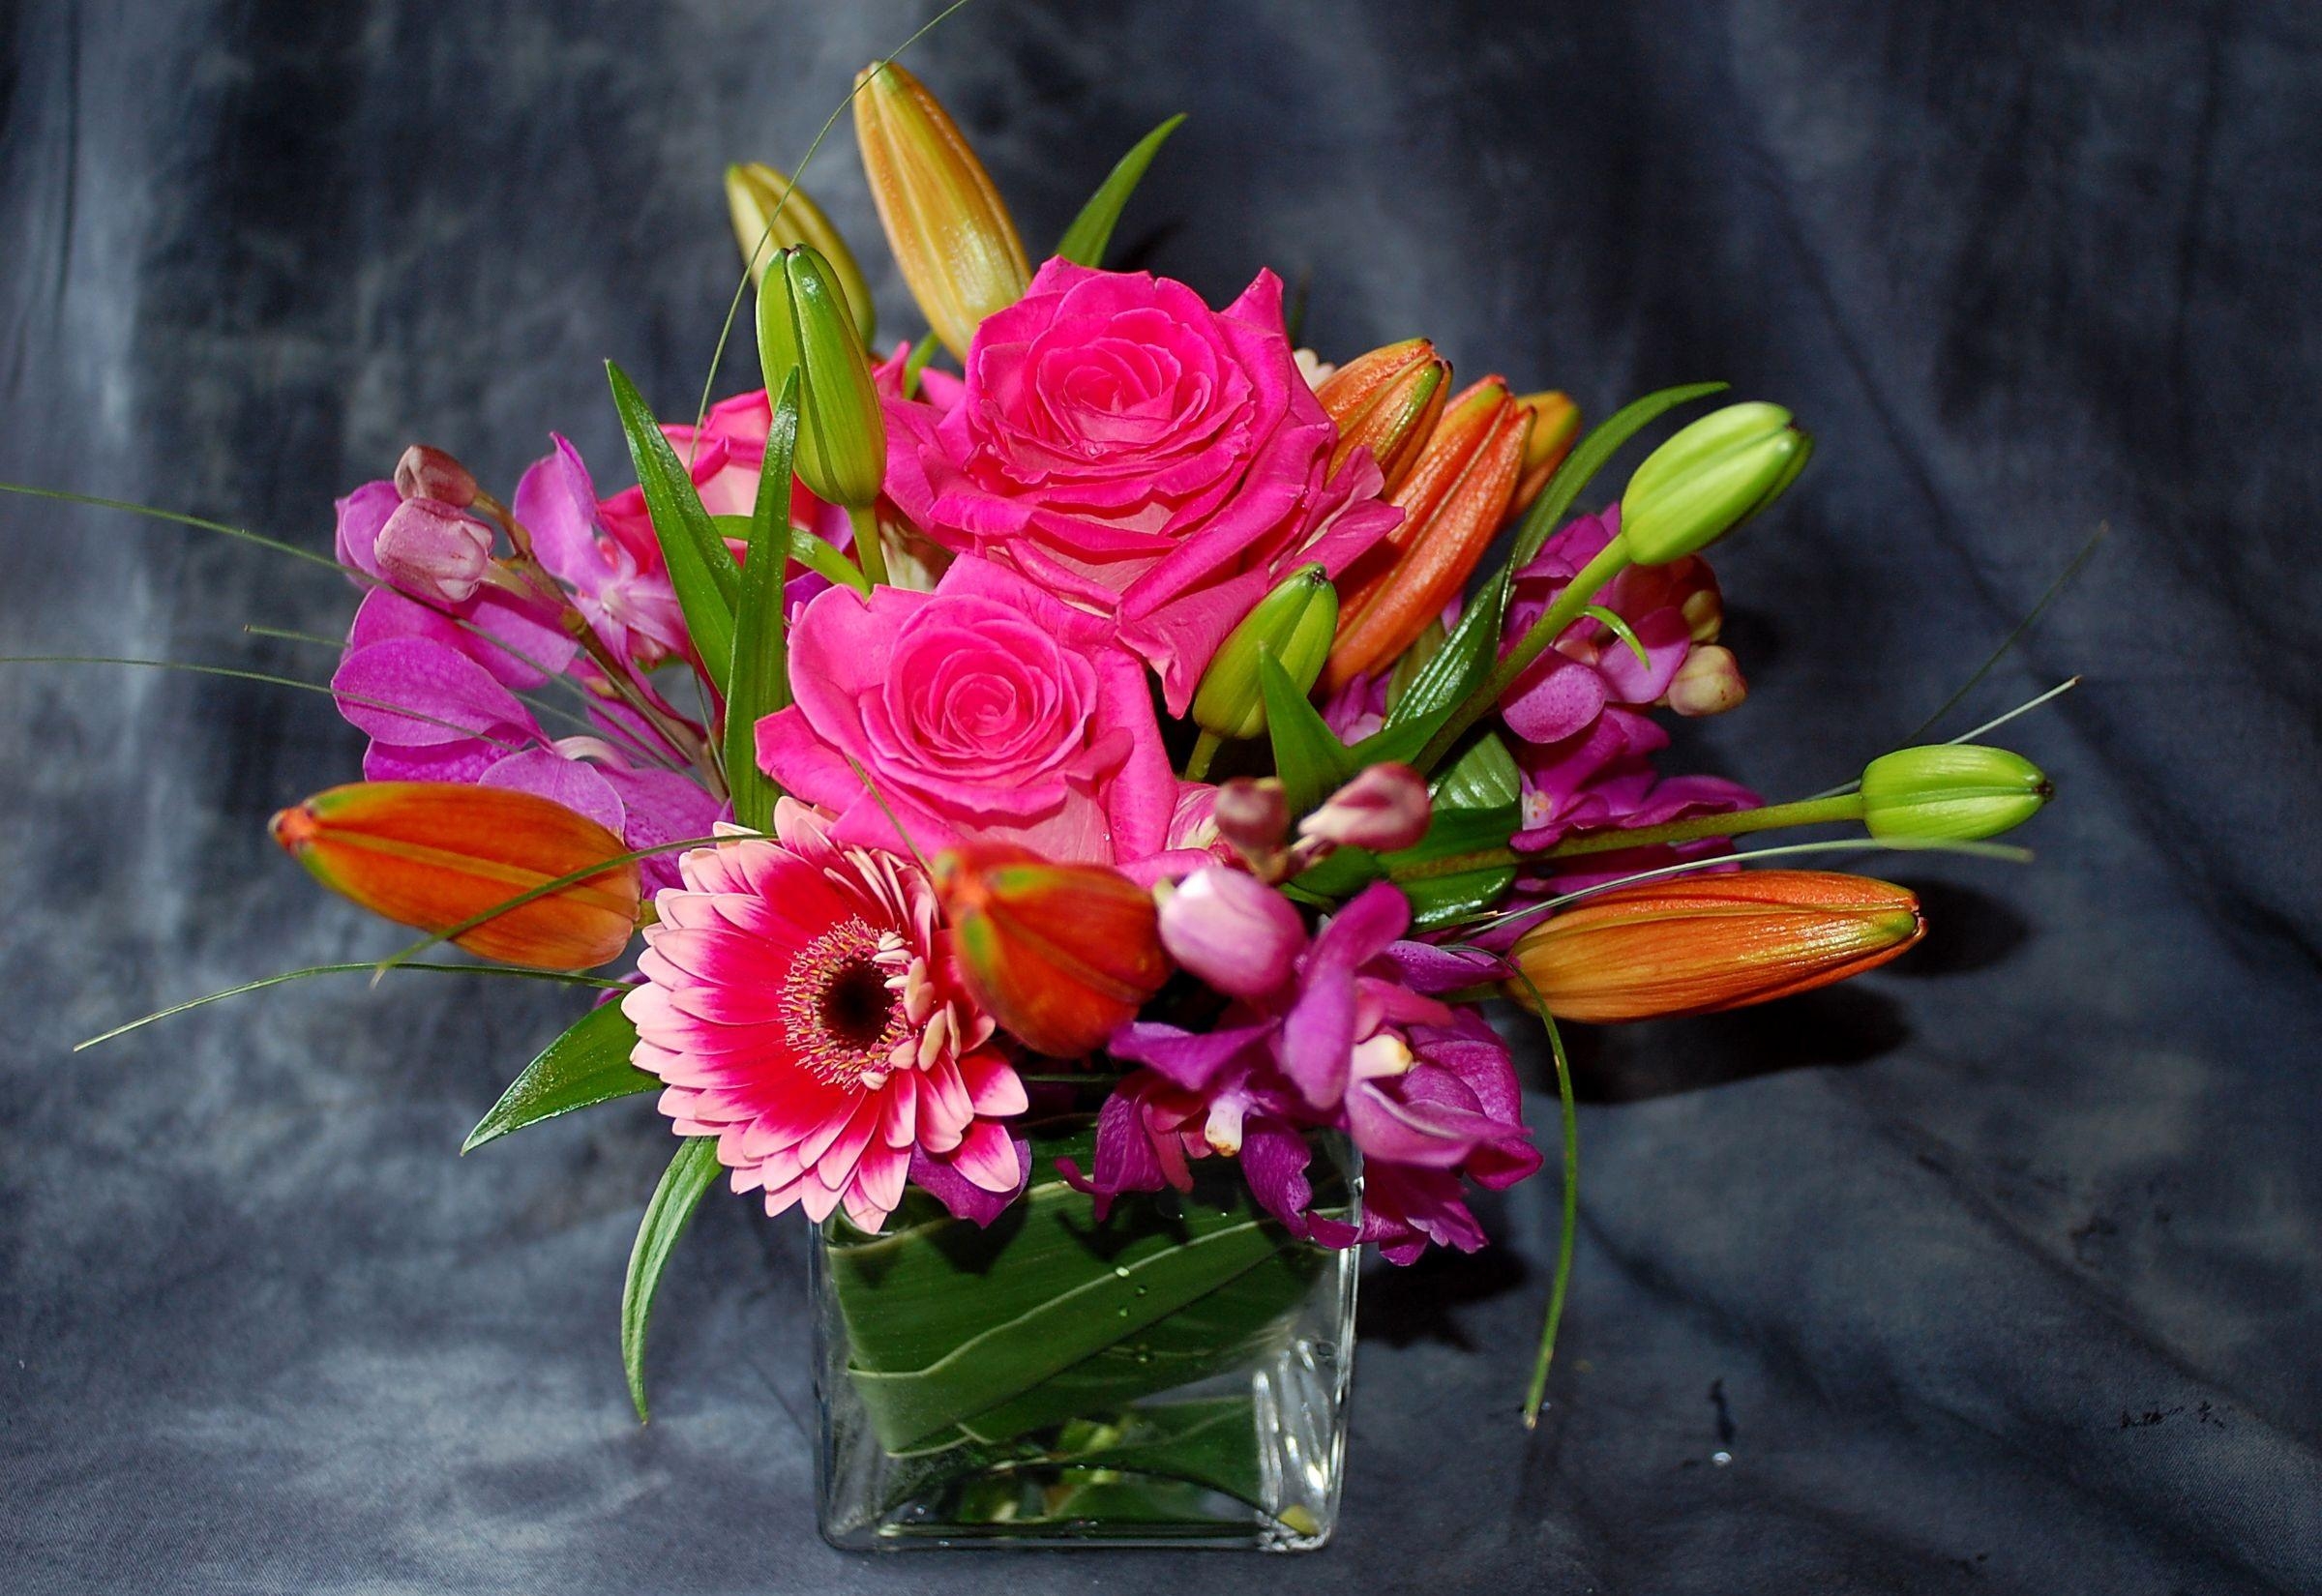 flowers, roses, gerberas, buds, composition, orchids